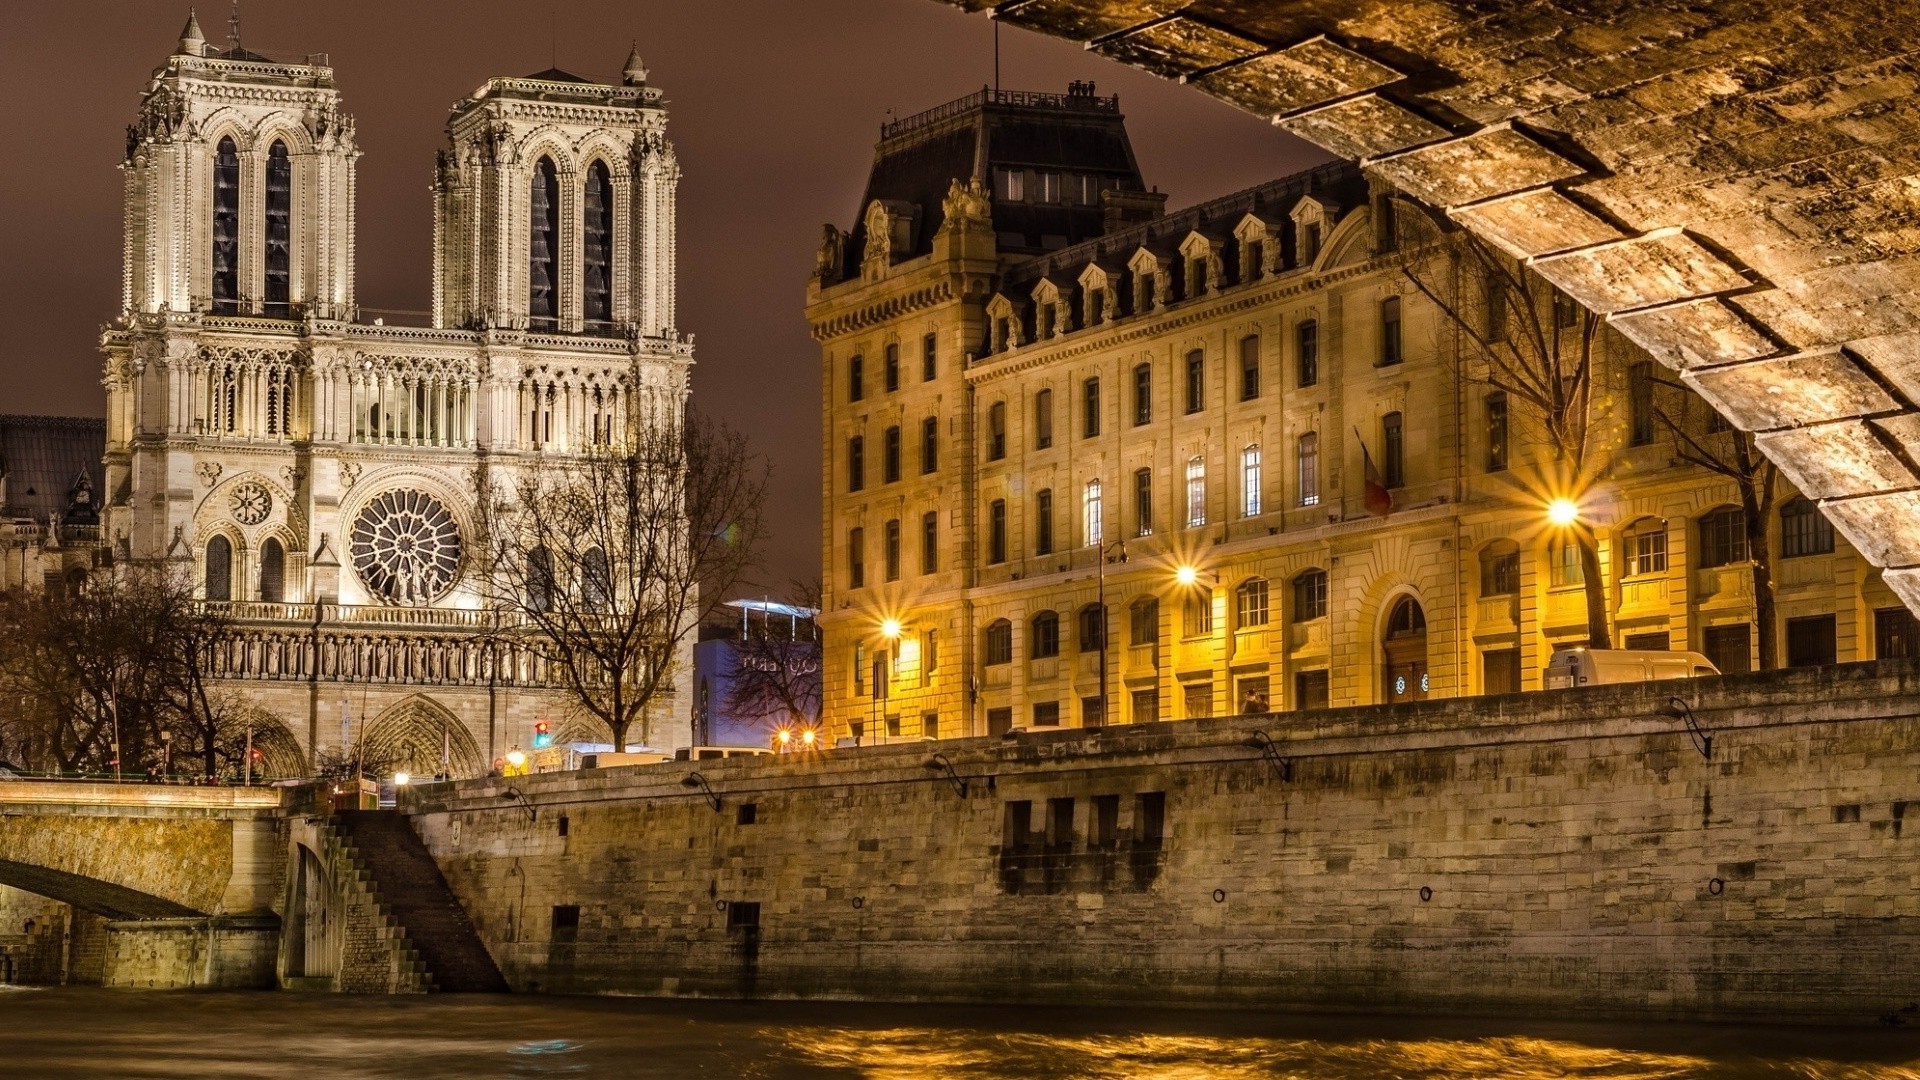 Wallpaper, trees, street light, city, cityscape, night, architecture, reflection, Tourism, evening, bridge, river, France, old building, Paris, cathedral, palace, chateau, Notre dame, lamps, landmark, facade, 1920x1080 px, waterway, ancient history